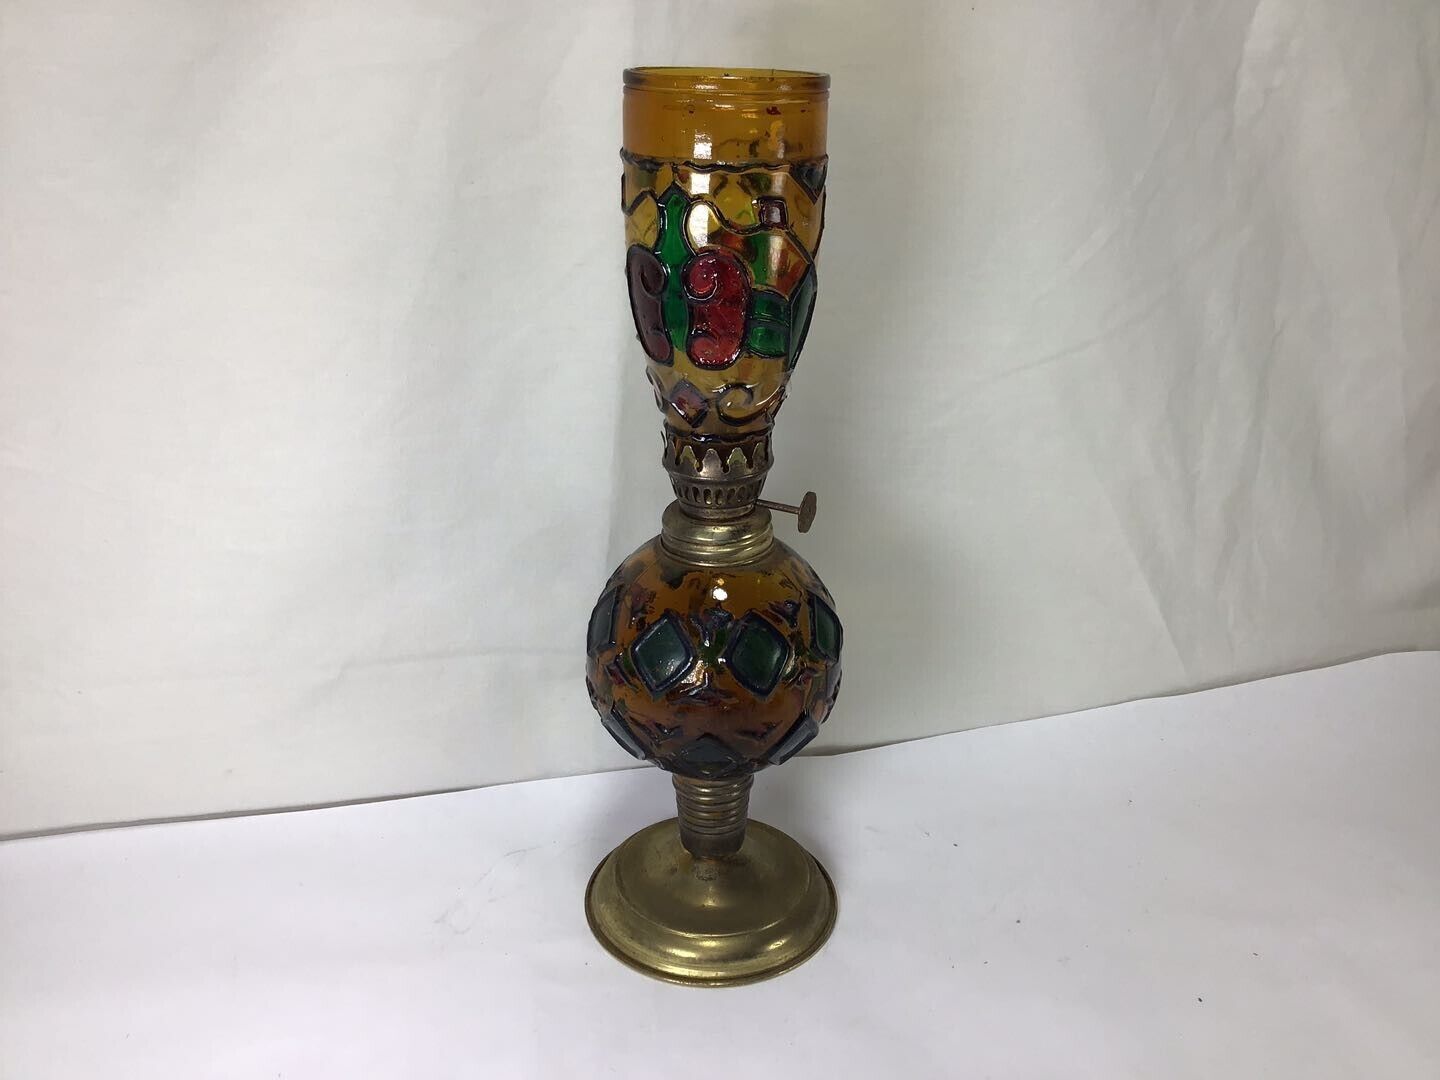 OO54 Vintage Miniature Oil / Perfume Lamp AMBER STAINED GLASS & BRASS BASE -Mini